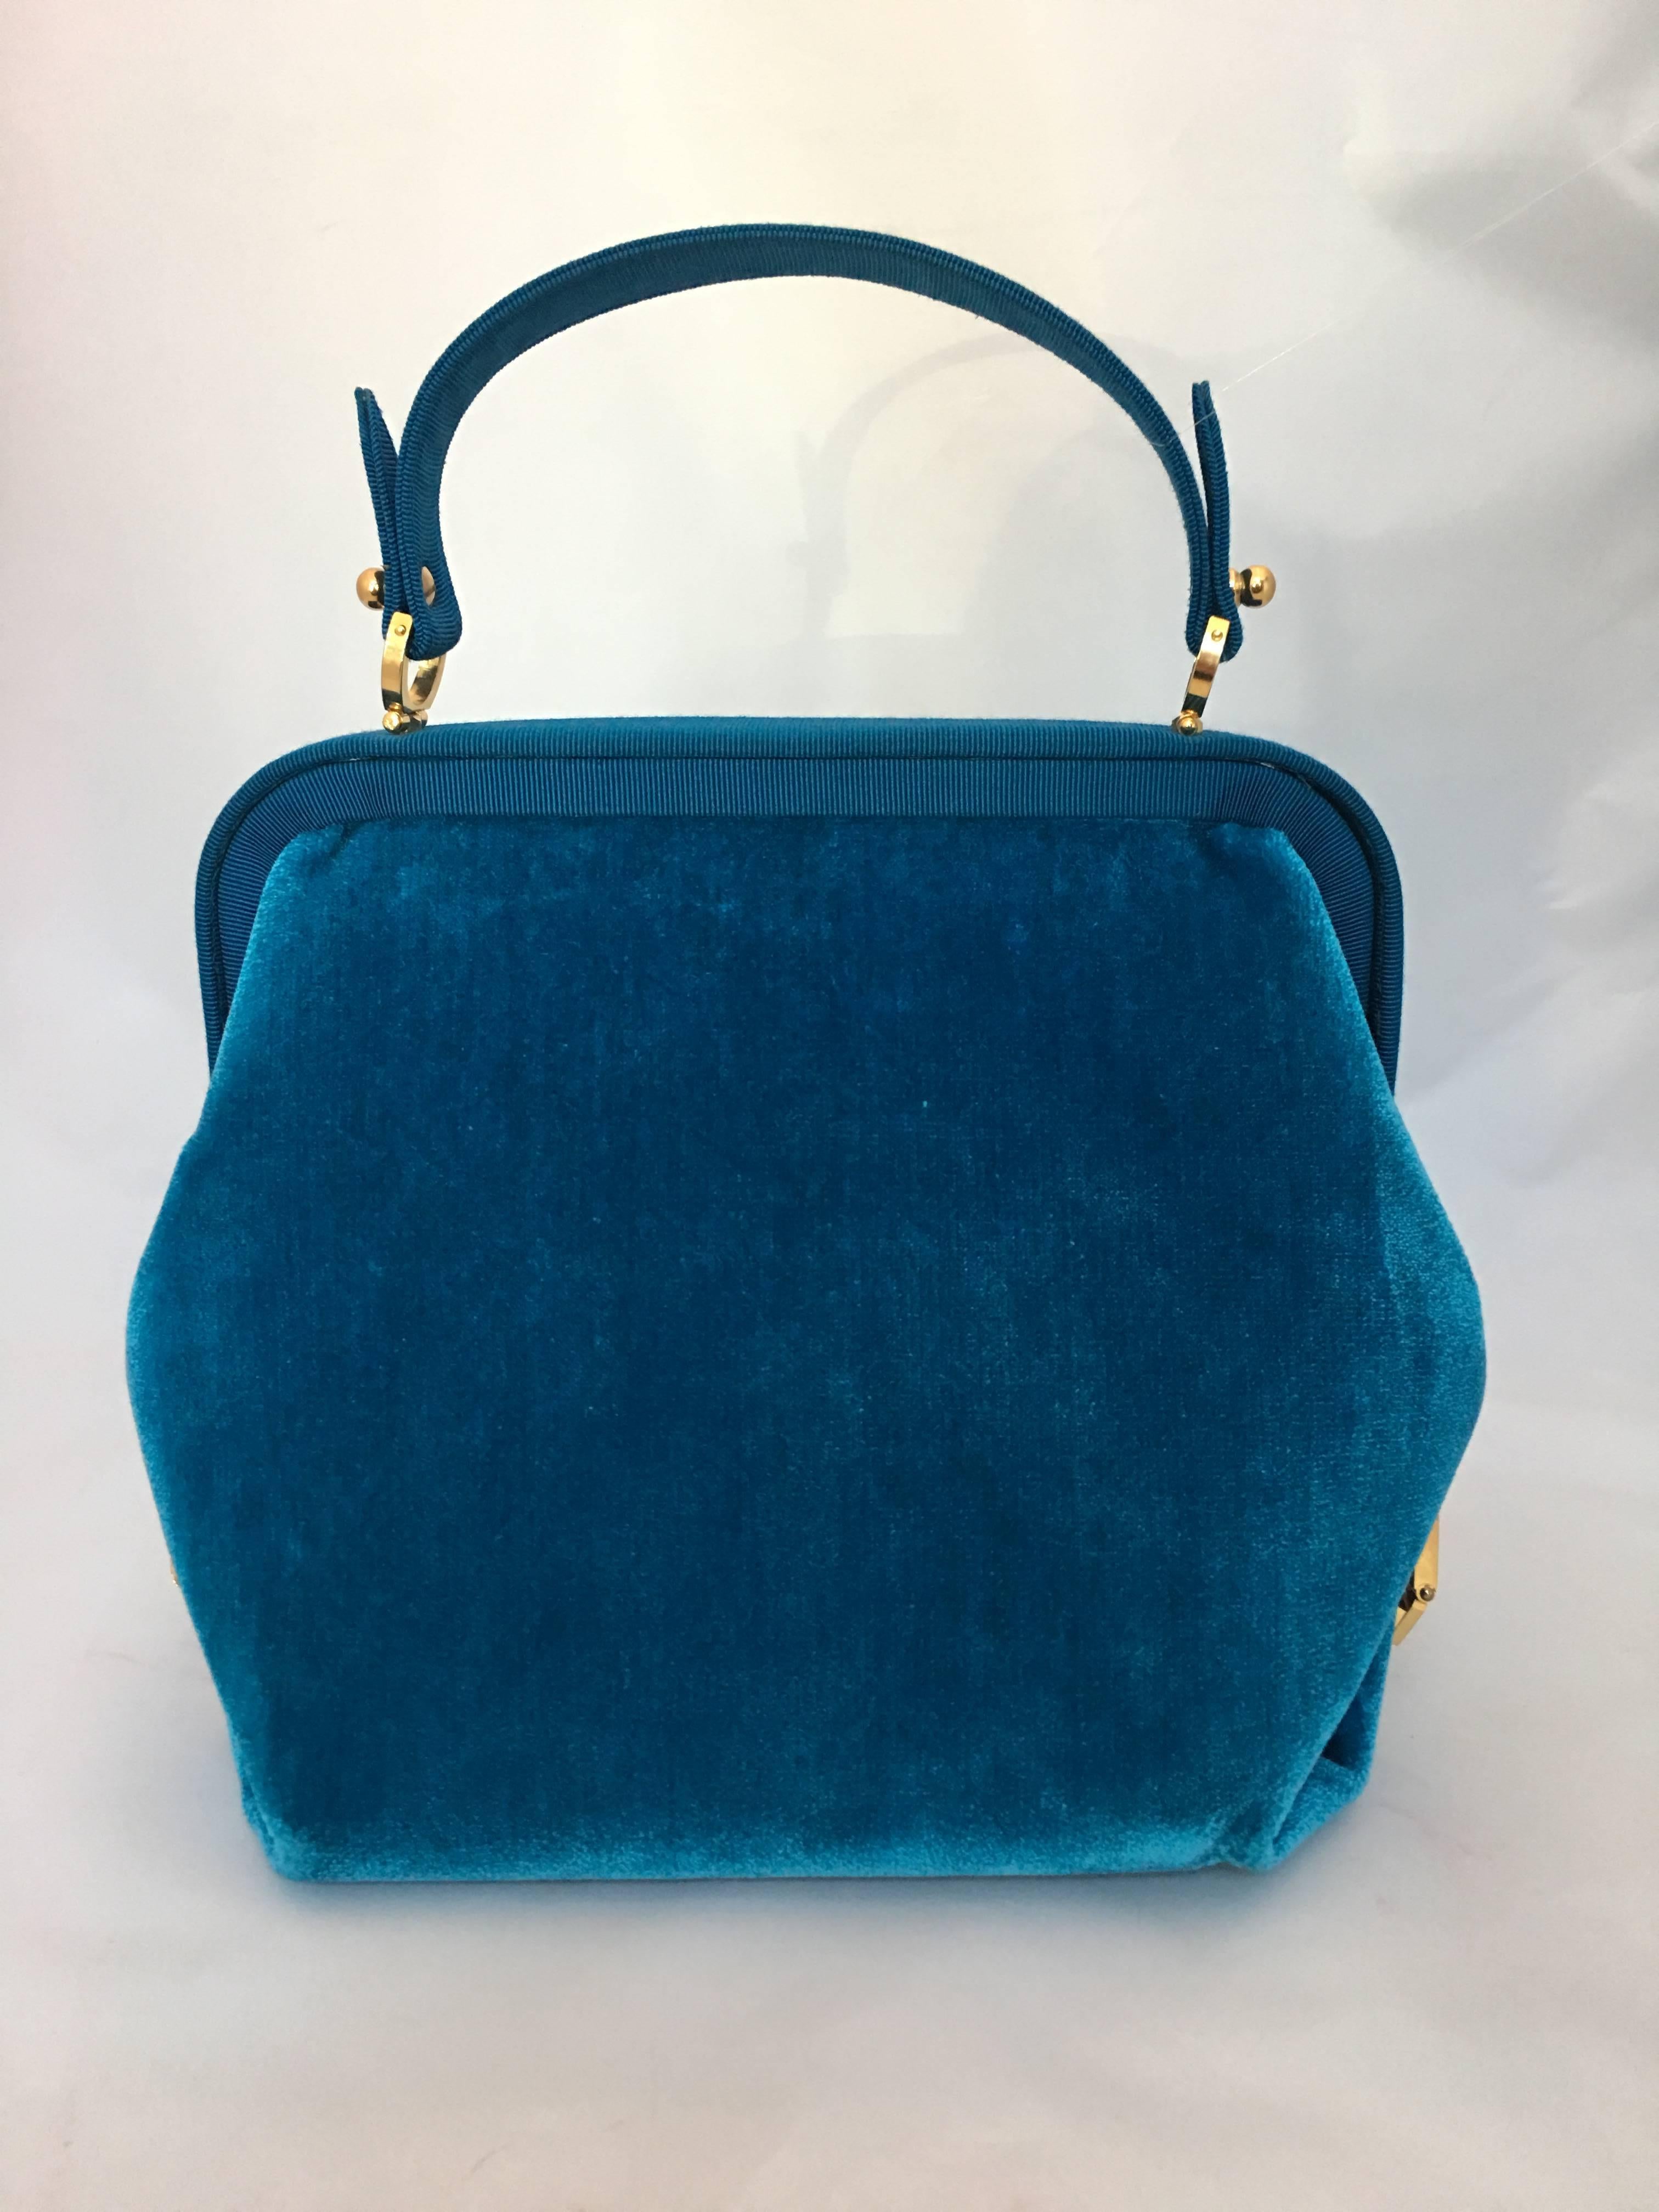 Roberta di Camerino Turquoise Teal Blue Velvet handbag with cut velvet ribbon design across middle front of bag. Grosgrain ribbon frame and handle with gold hardware closure and side gold locks. Inside has one zip pocket and one slit pocket.
Bag is